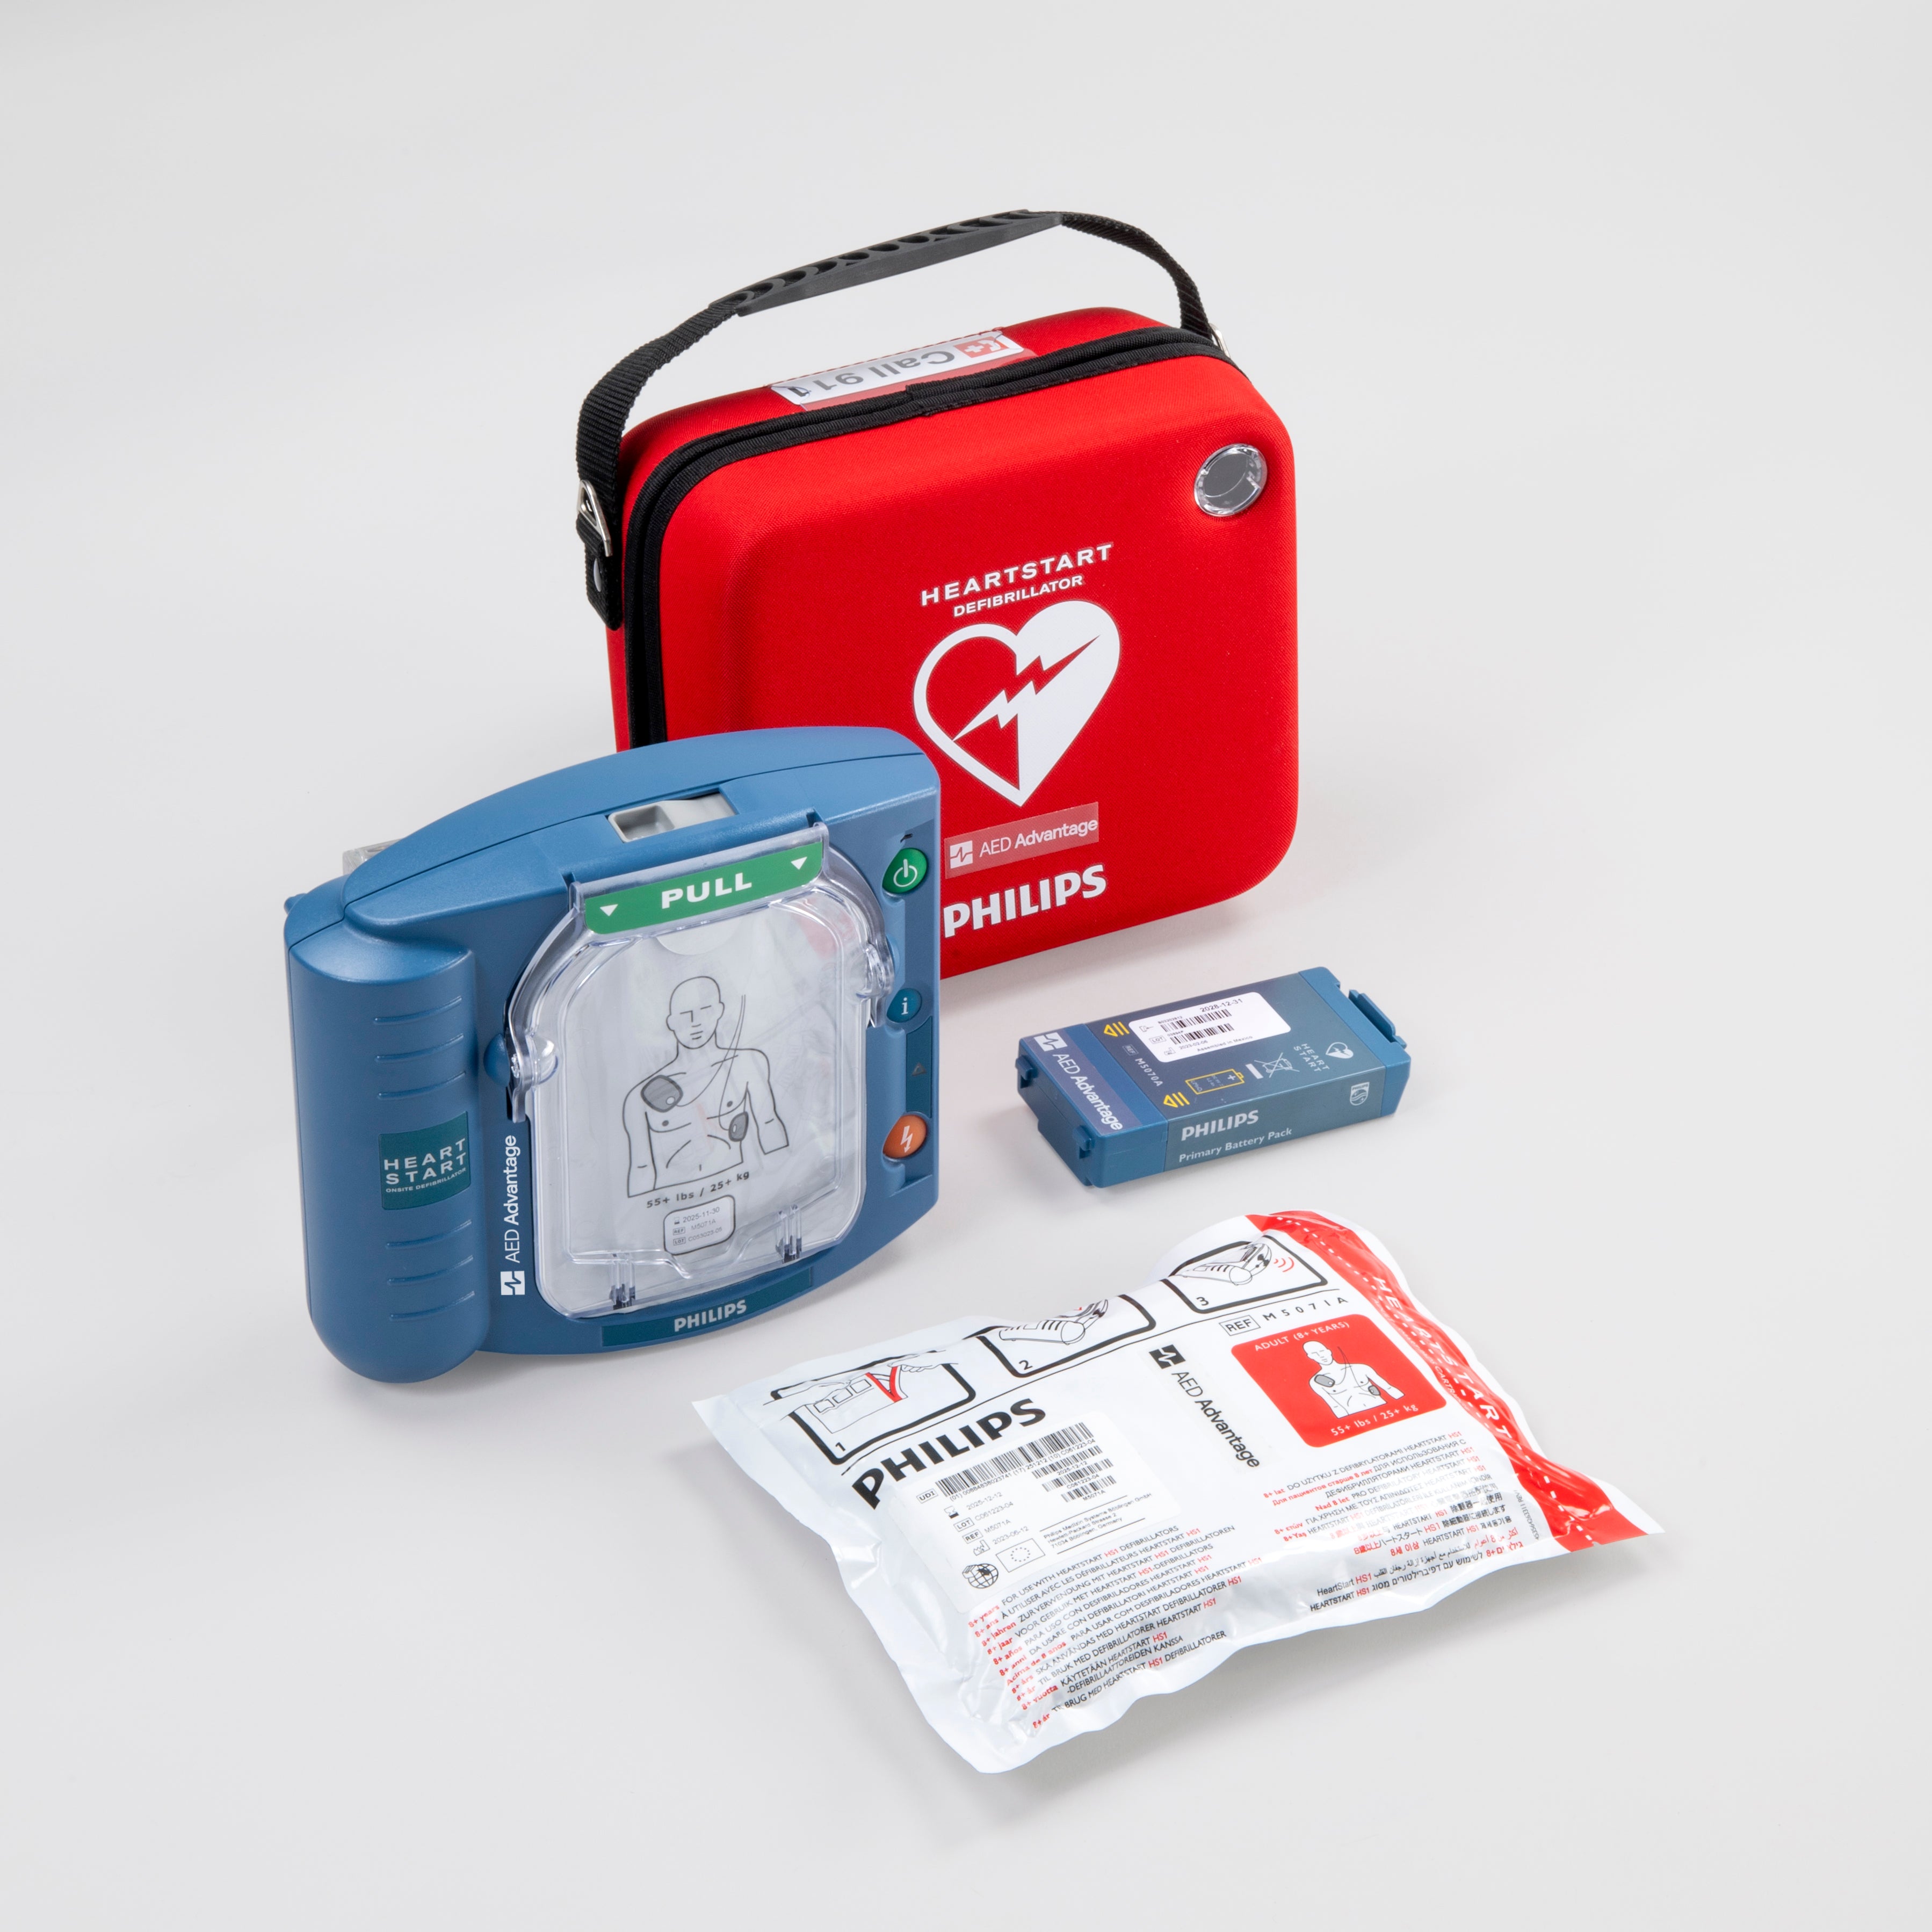 A Philips OnSite AED displayed with its bright red carry case, electrode pads, and battery